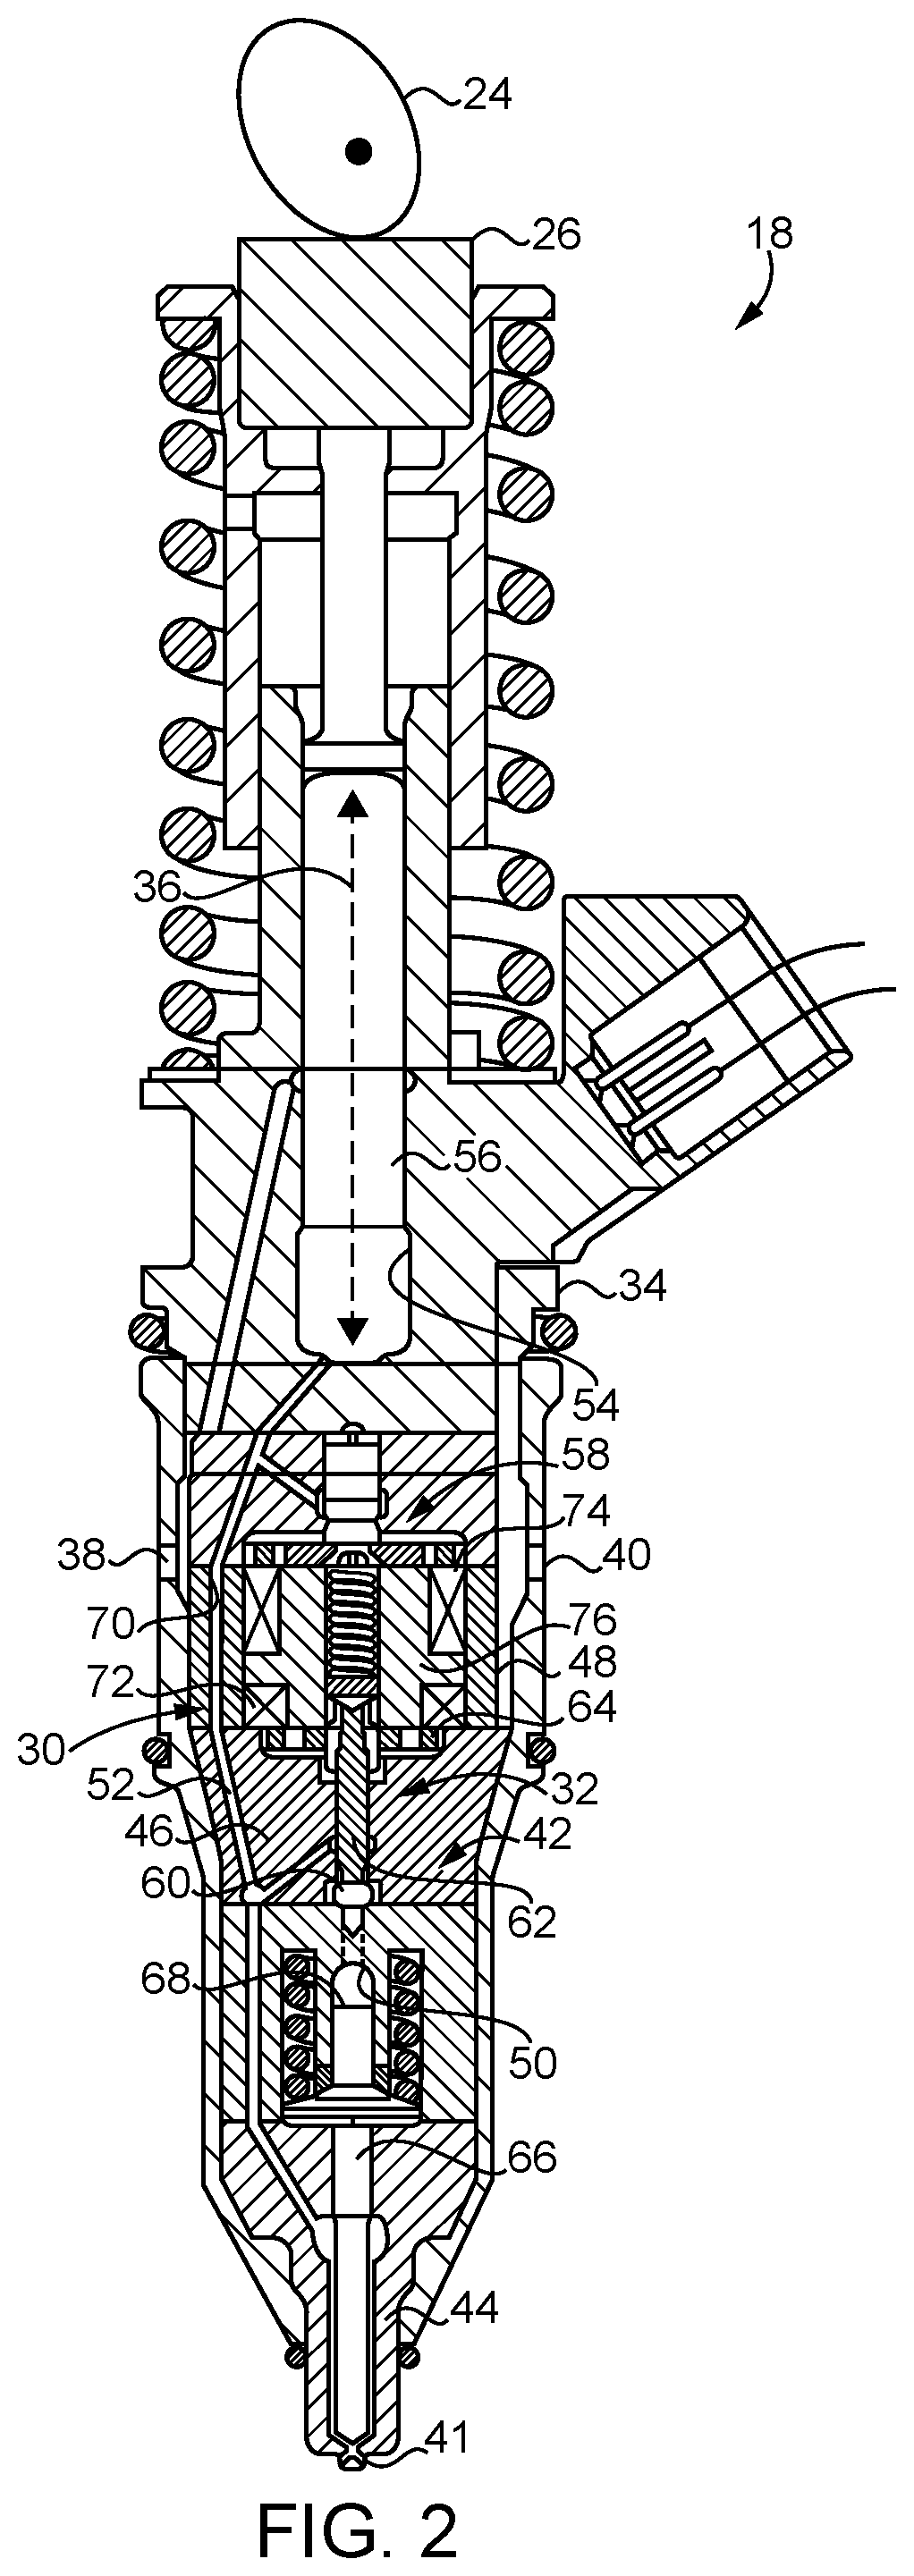 Fuel injector having residually stressed solenoid housing for improved pressure capapility